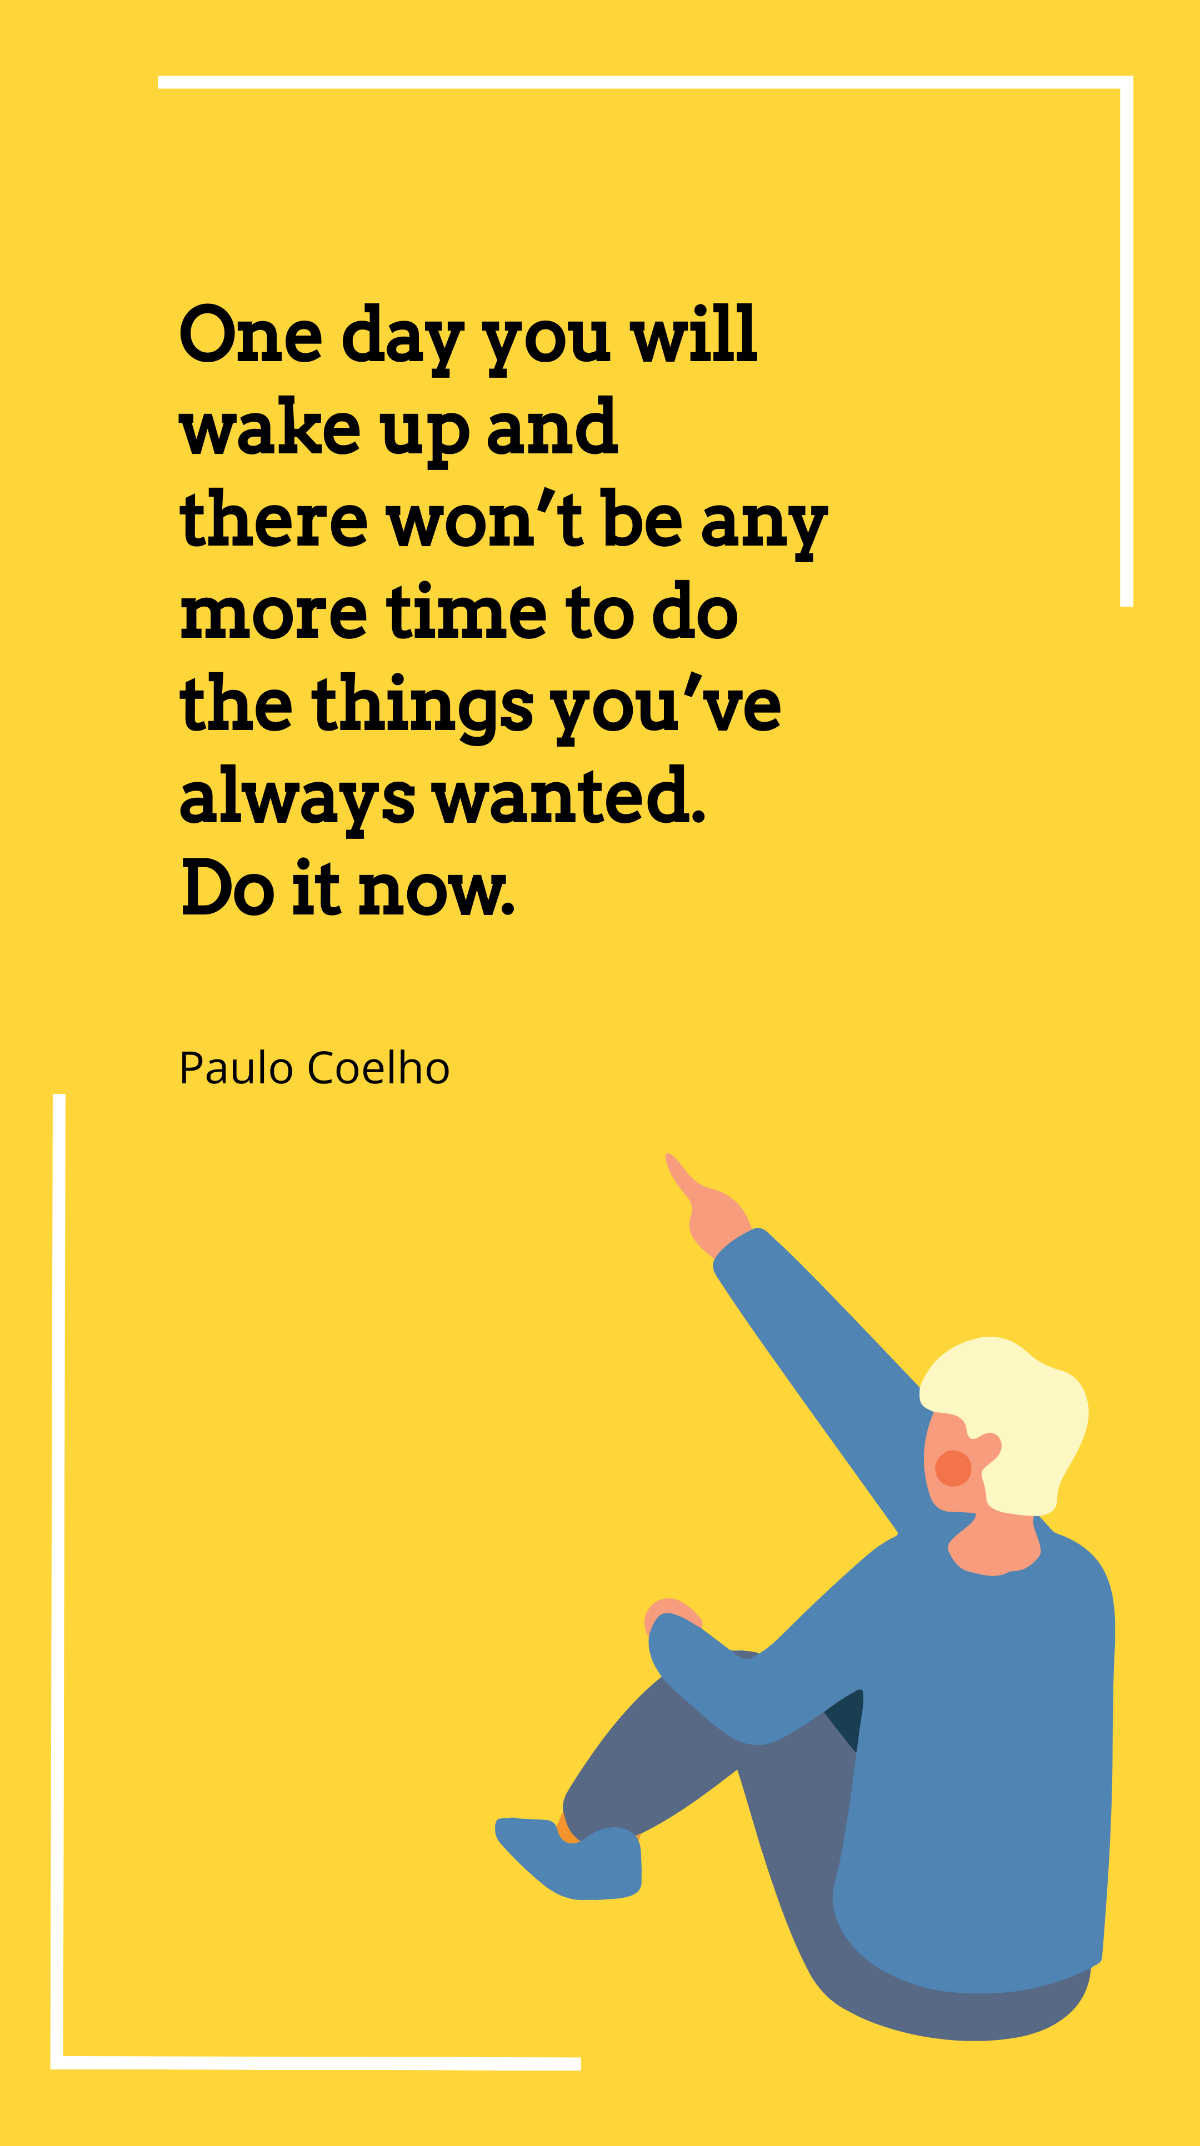 Paulo Coelho - One day you will wake up and there won’t be any more time to do the things you’ve always wanted. Do it now. Template